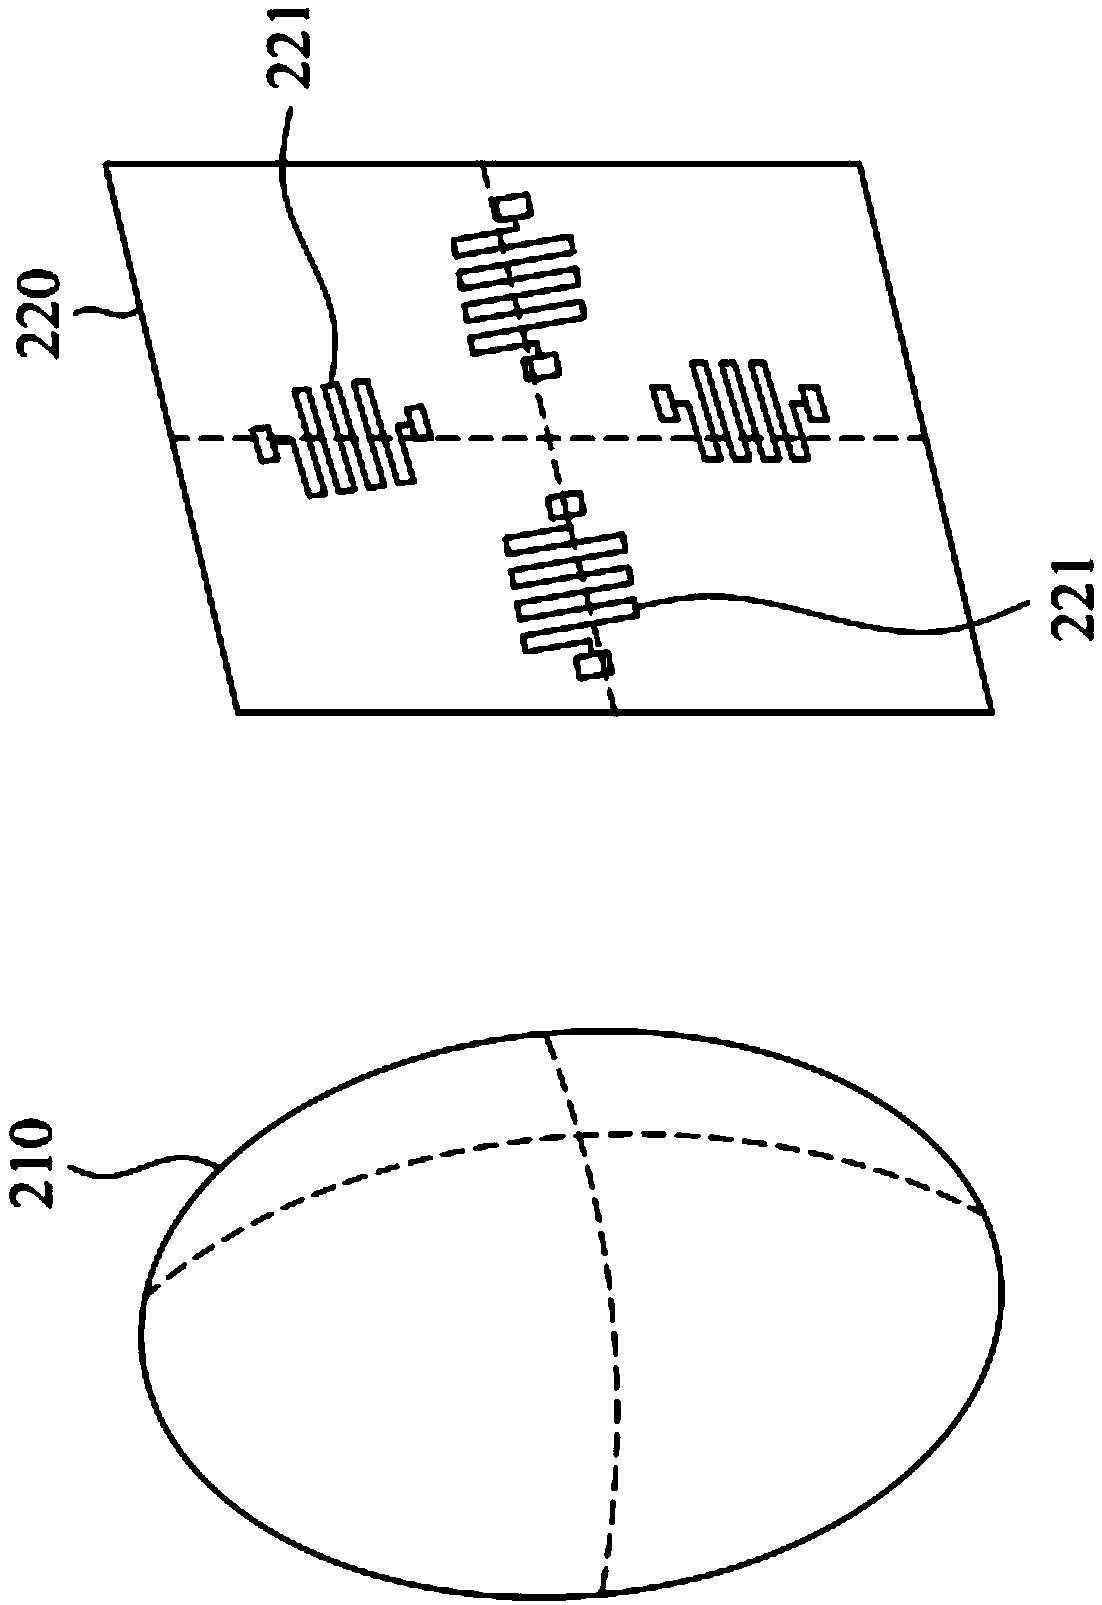 Curved surface pasting strain monitoring method